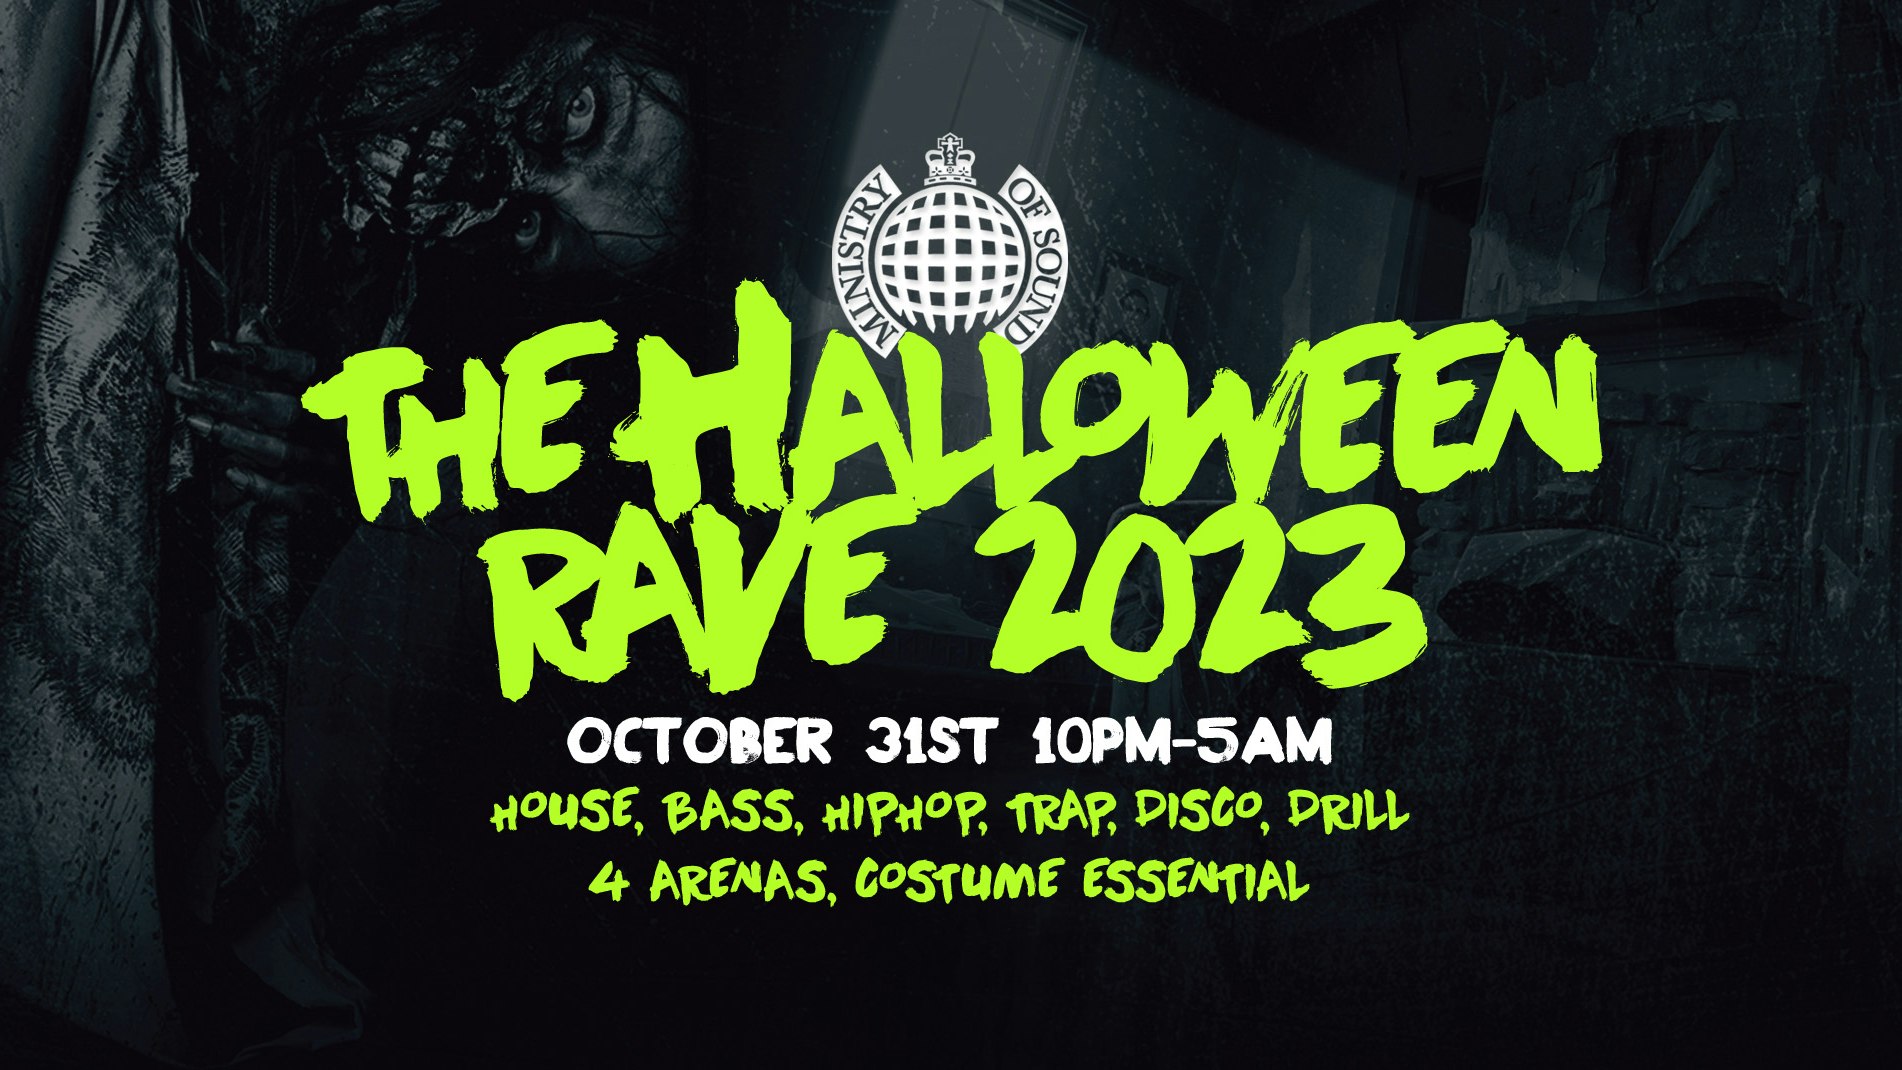 🚫 SOLD OUT  🚫 The Halloween Rave 2023  |  Ministry of Sound 👻   🚫 SOLD OUT  🚫